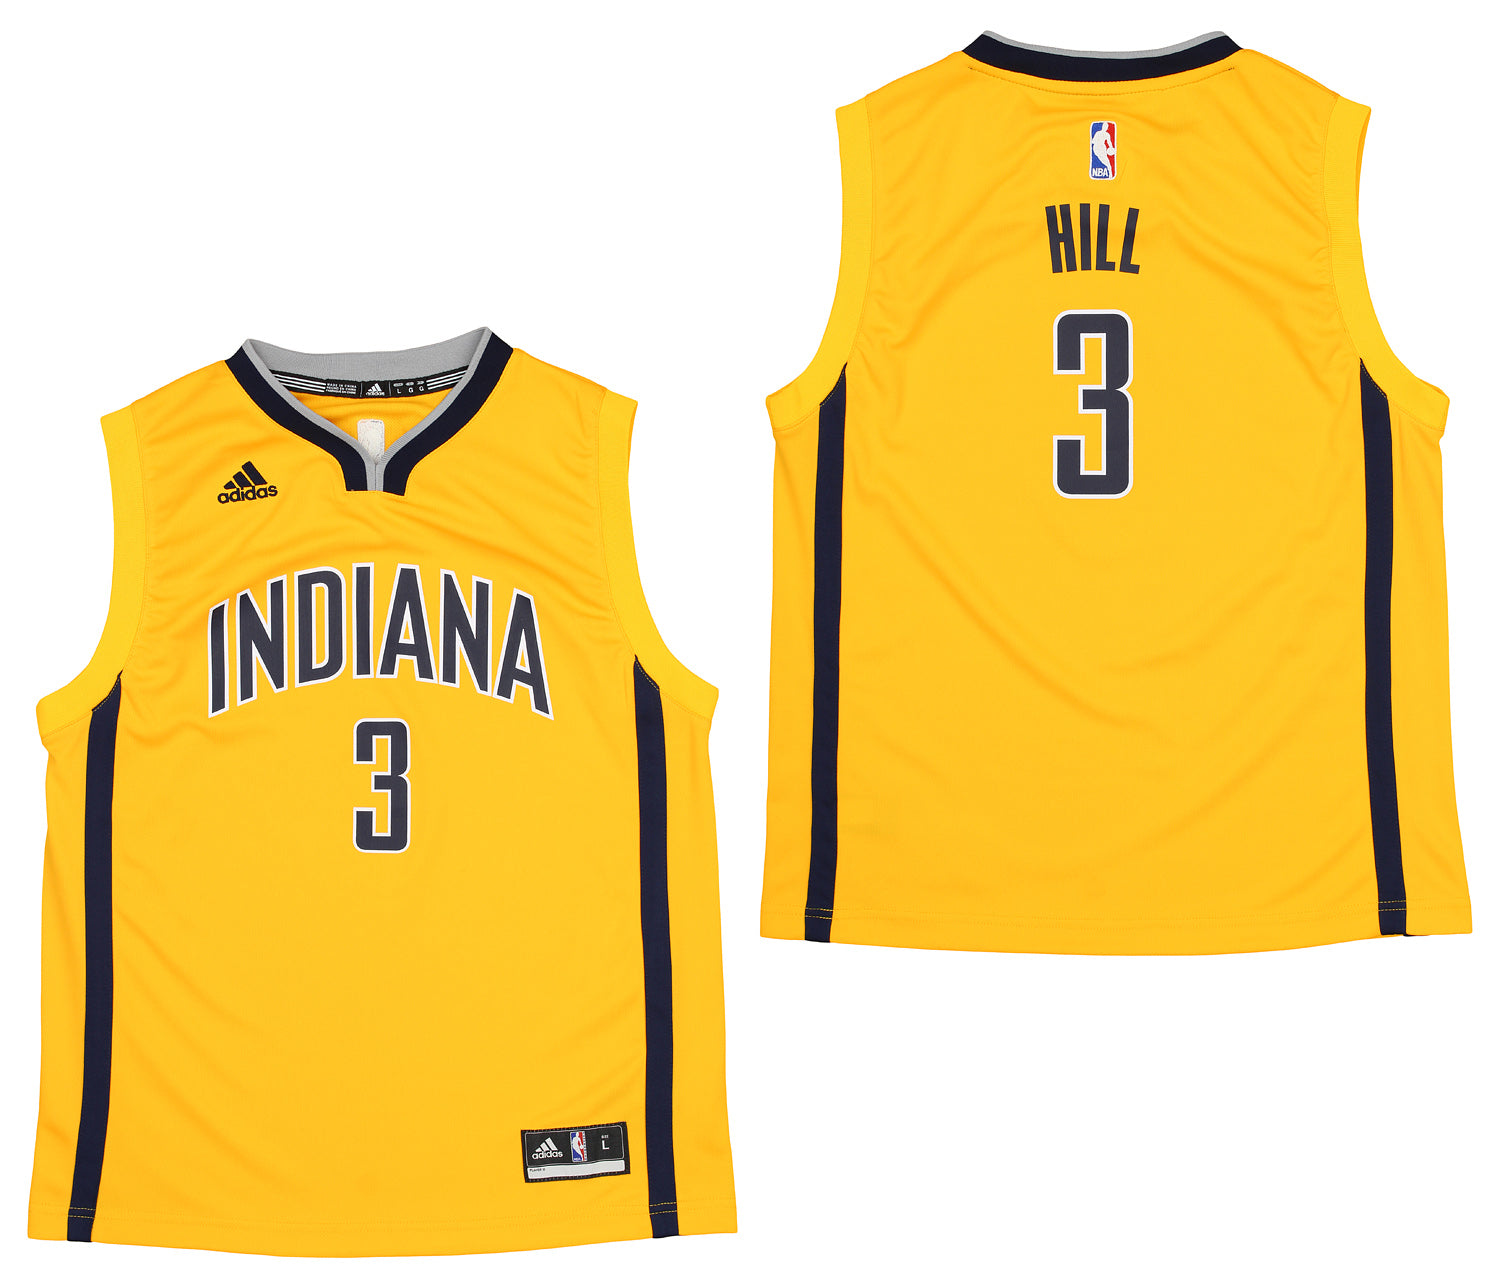 Adidas NBA Youth (8-20) Indiana Pacers George Hill #6 Replica Alternate Jersey